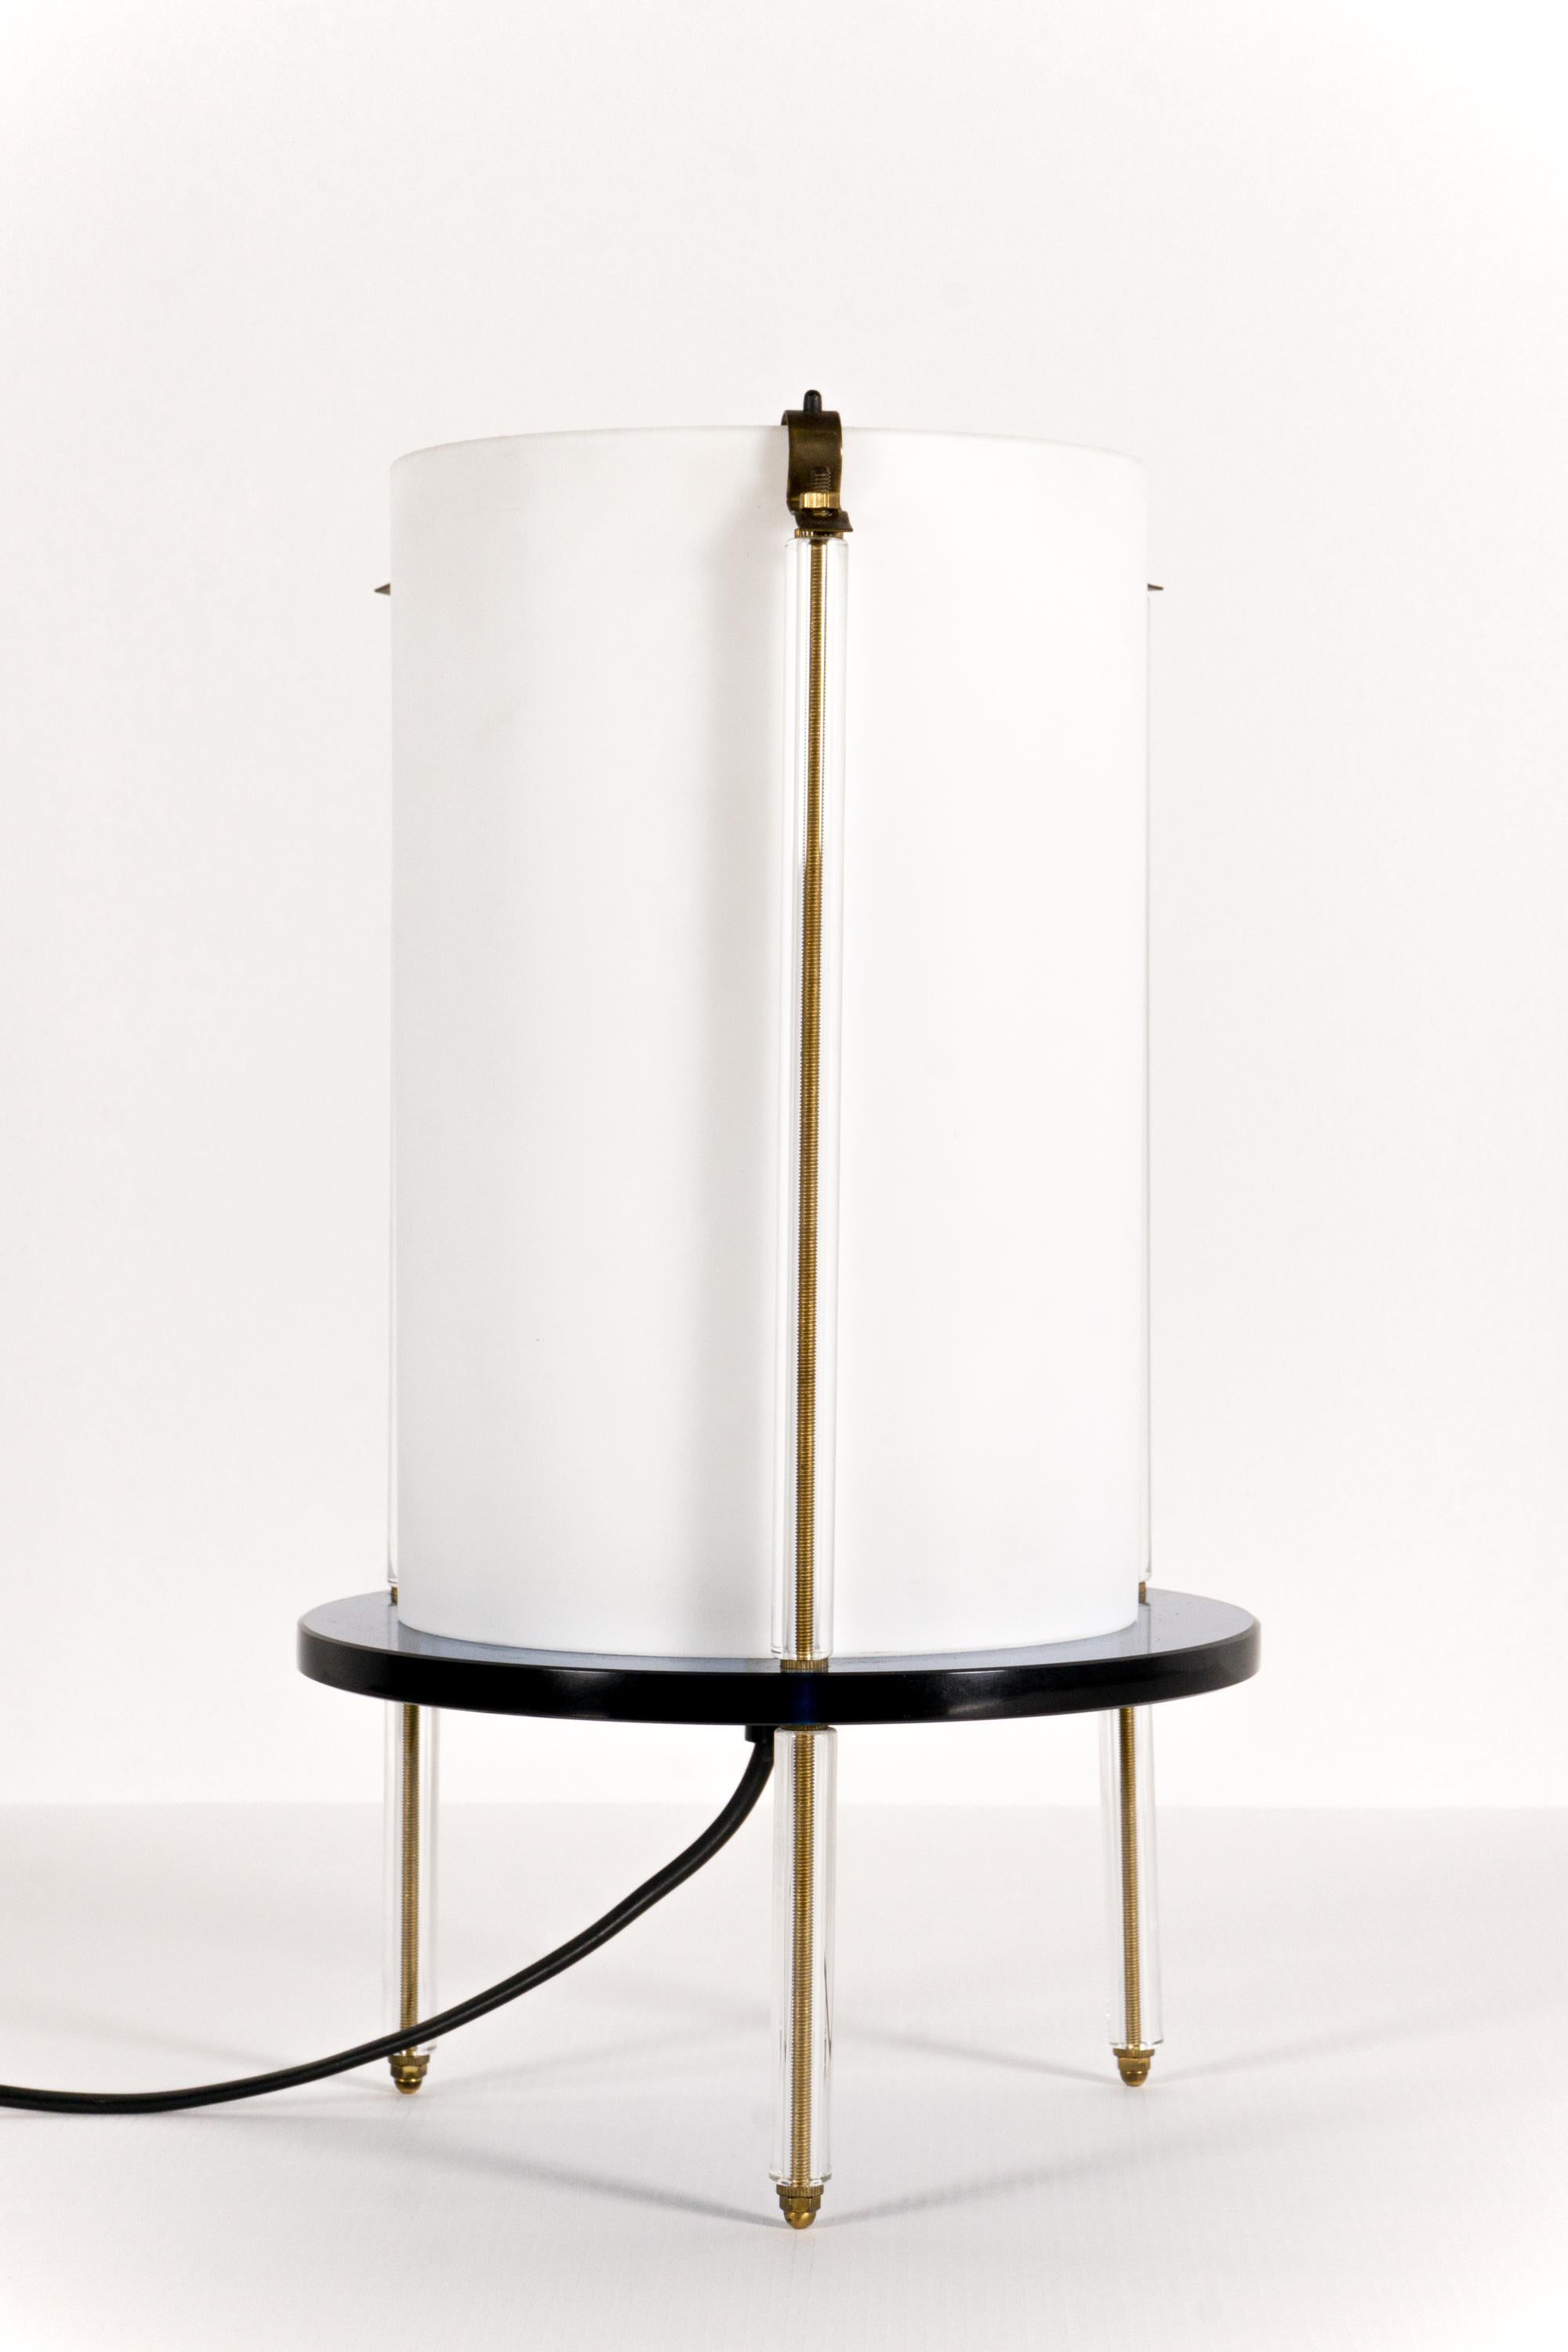 Umberto Riva, an Italian architect, designer and painter, designed around 1985 this particular table lamp, known as model 2656.
The main body is made of colored cut glass, held by struts of brass.
The lamp has a height of 34 cm with a diameter of